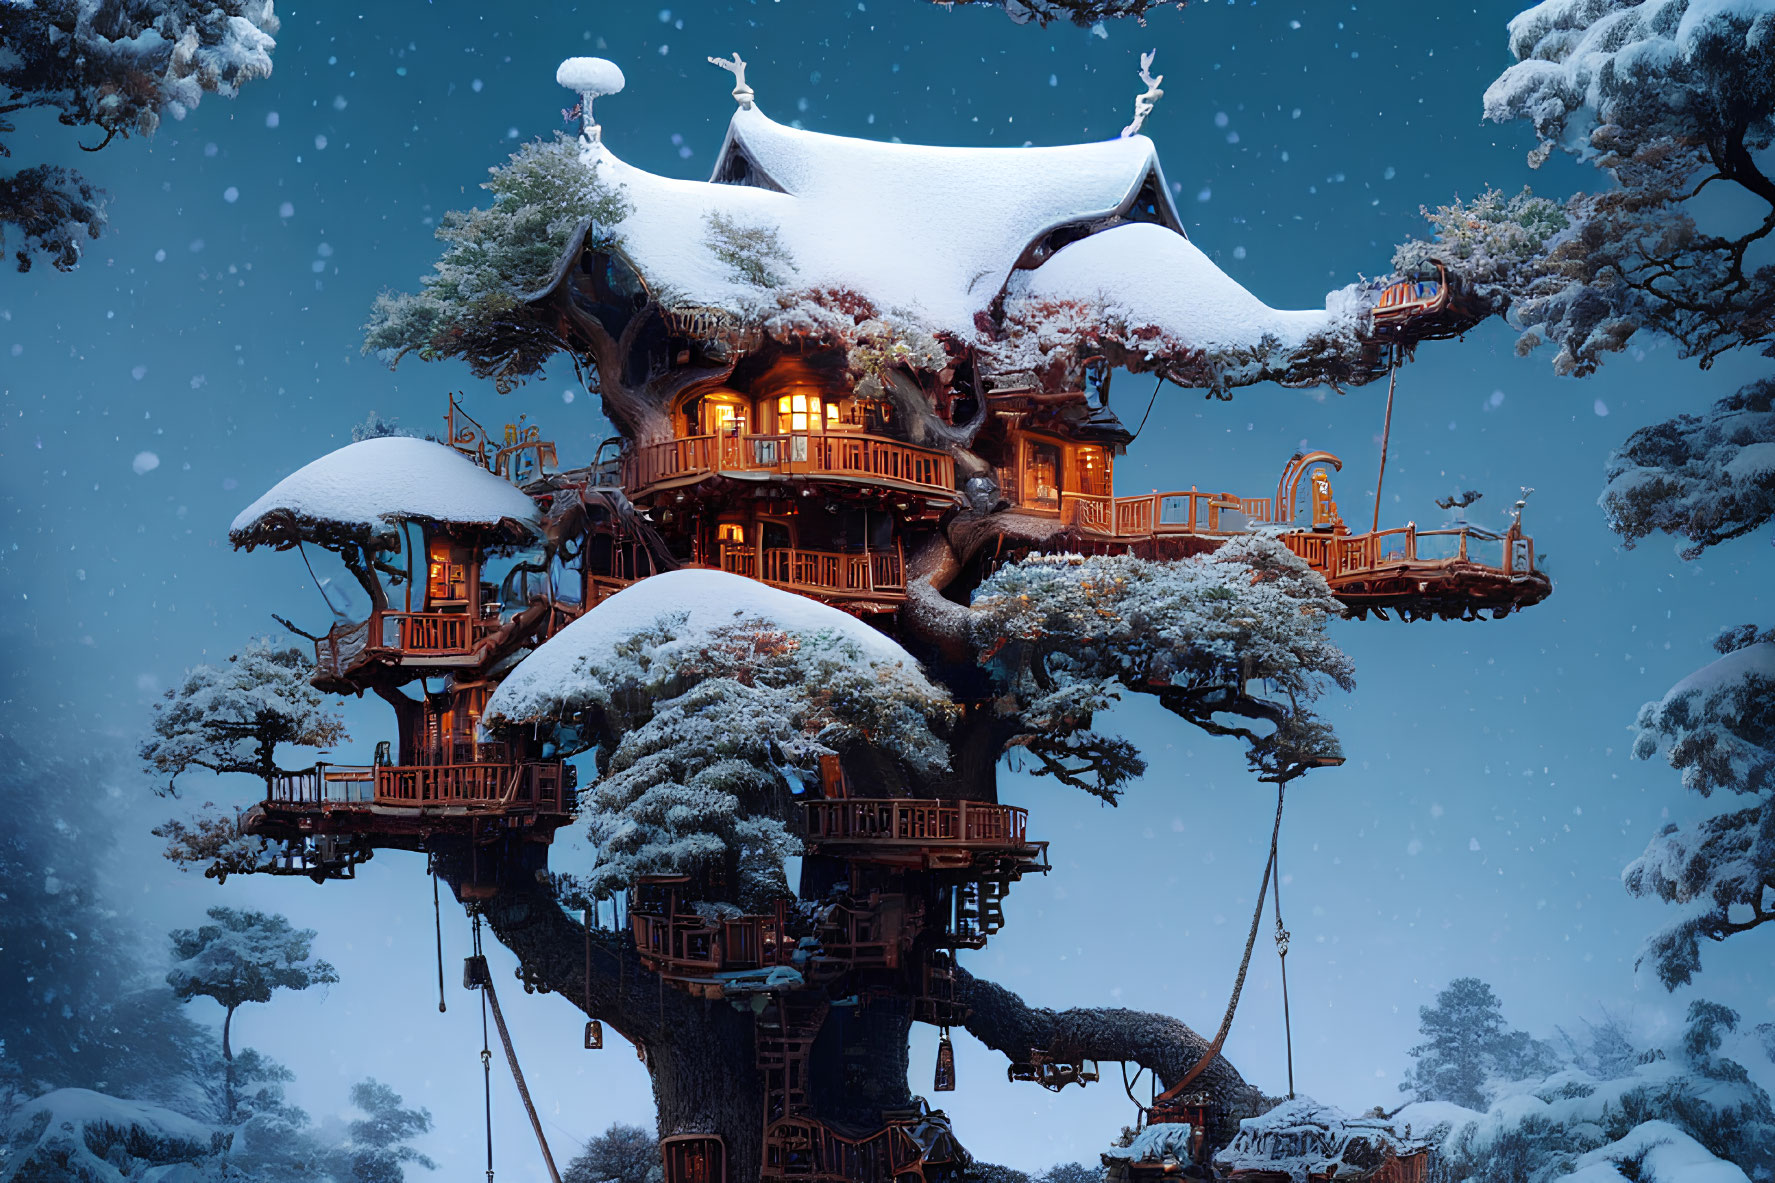 Snow-covered forest treehouse with warm lighting